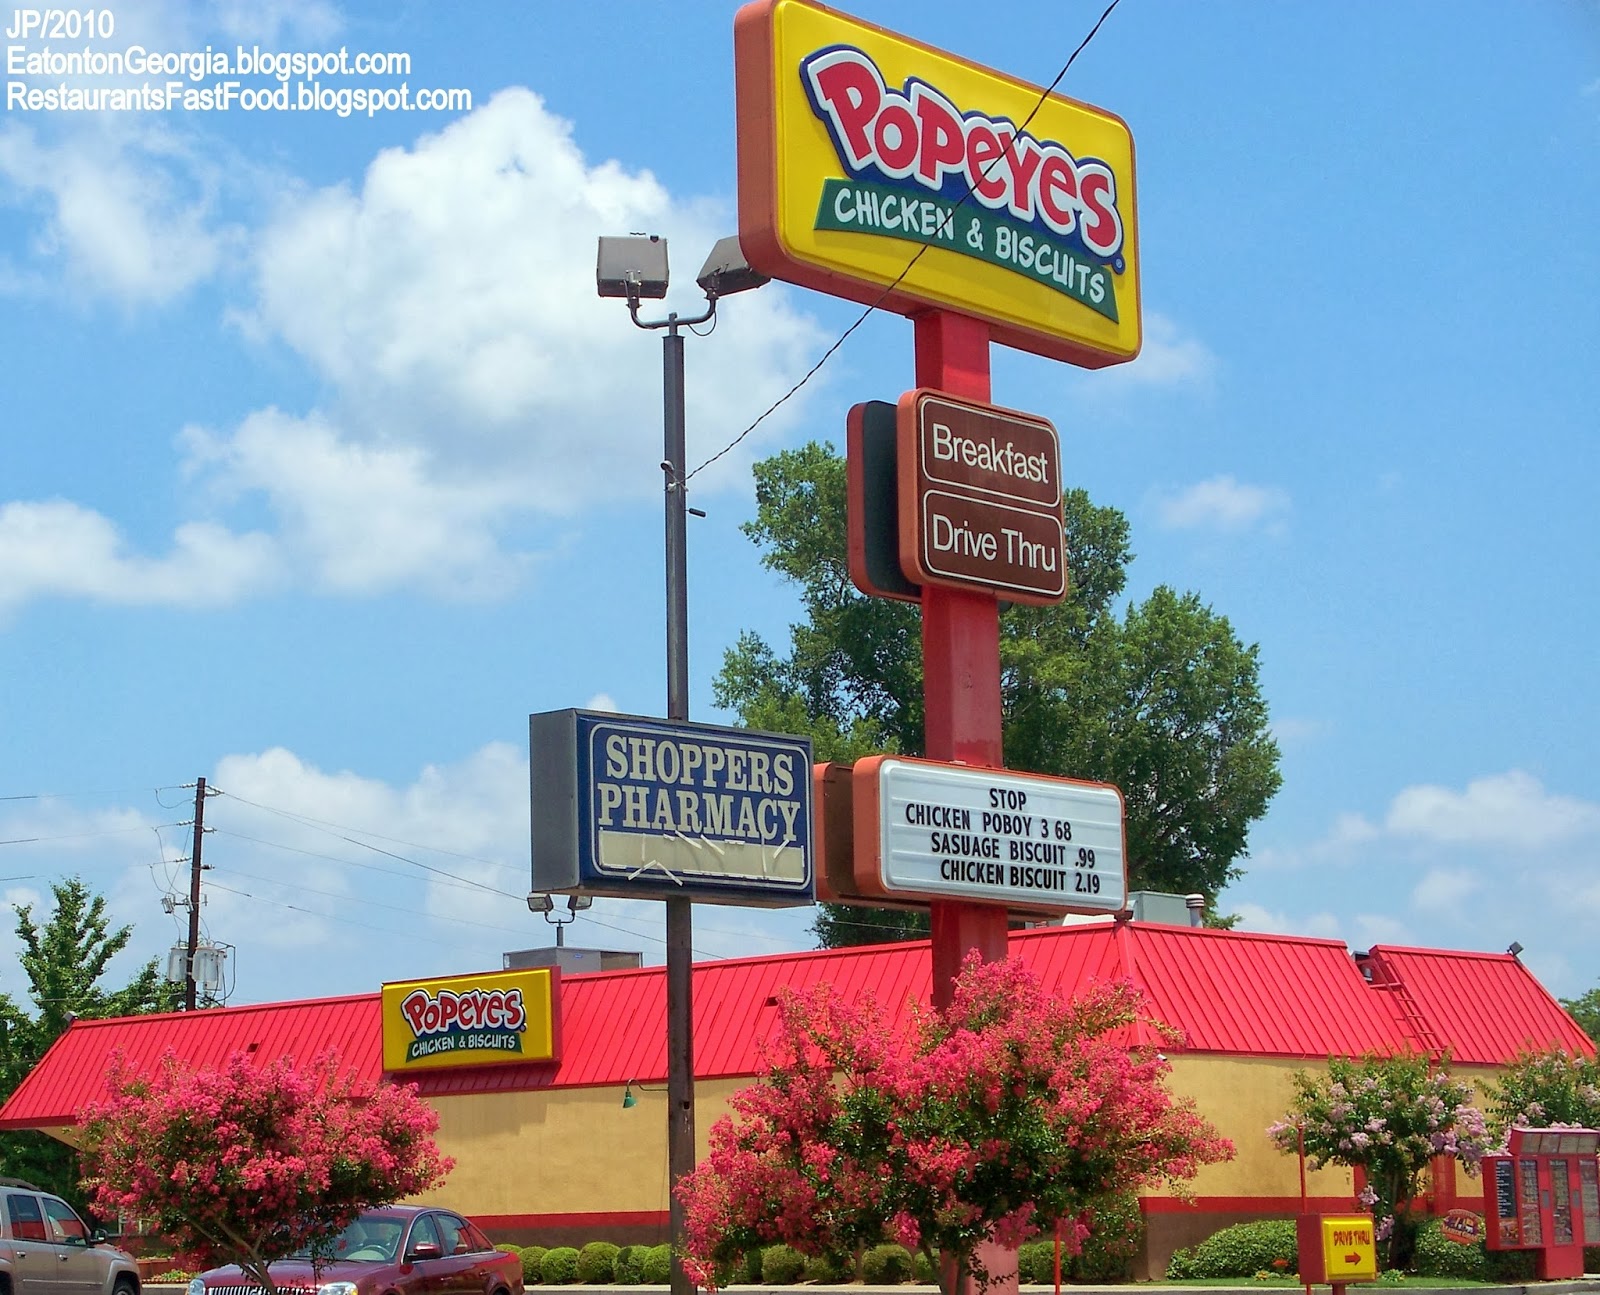 popeyes fried chicken locations in georgia